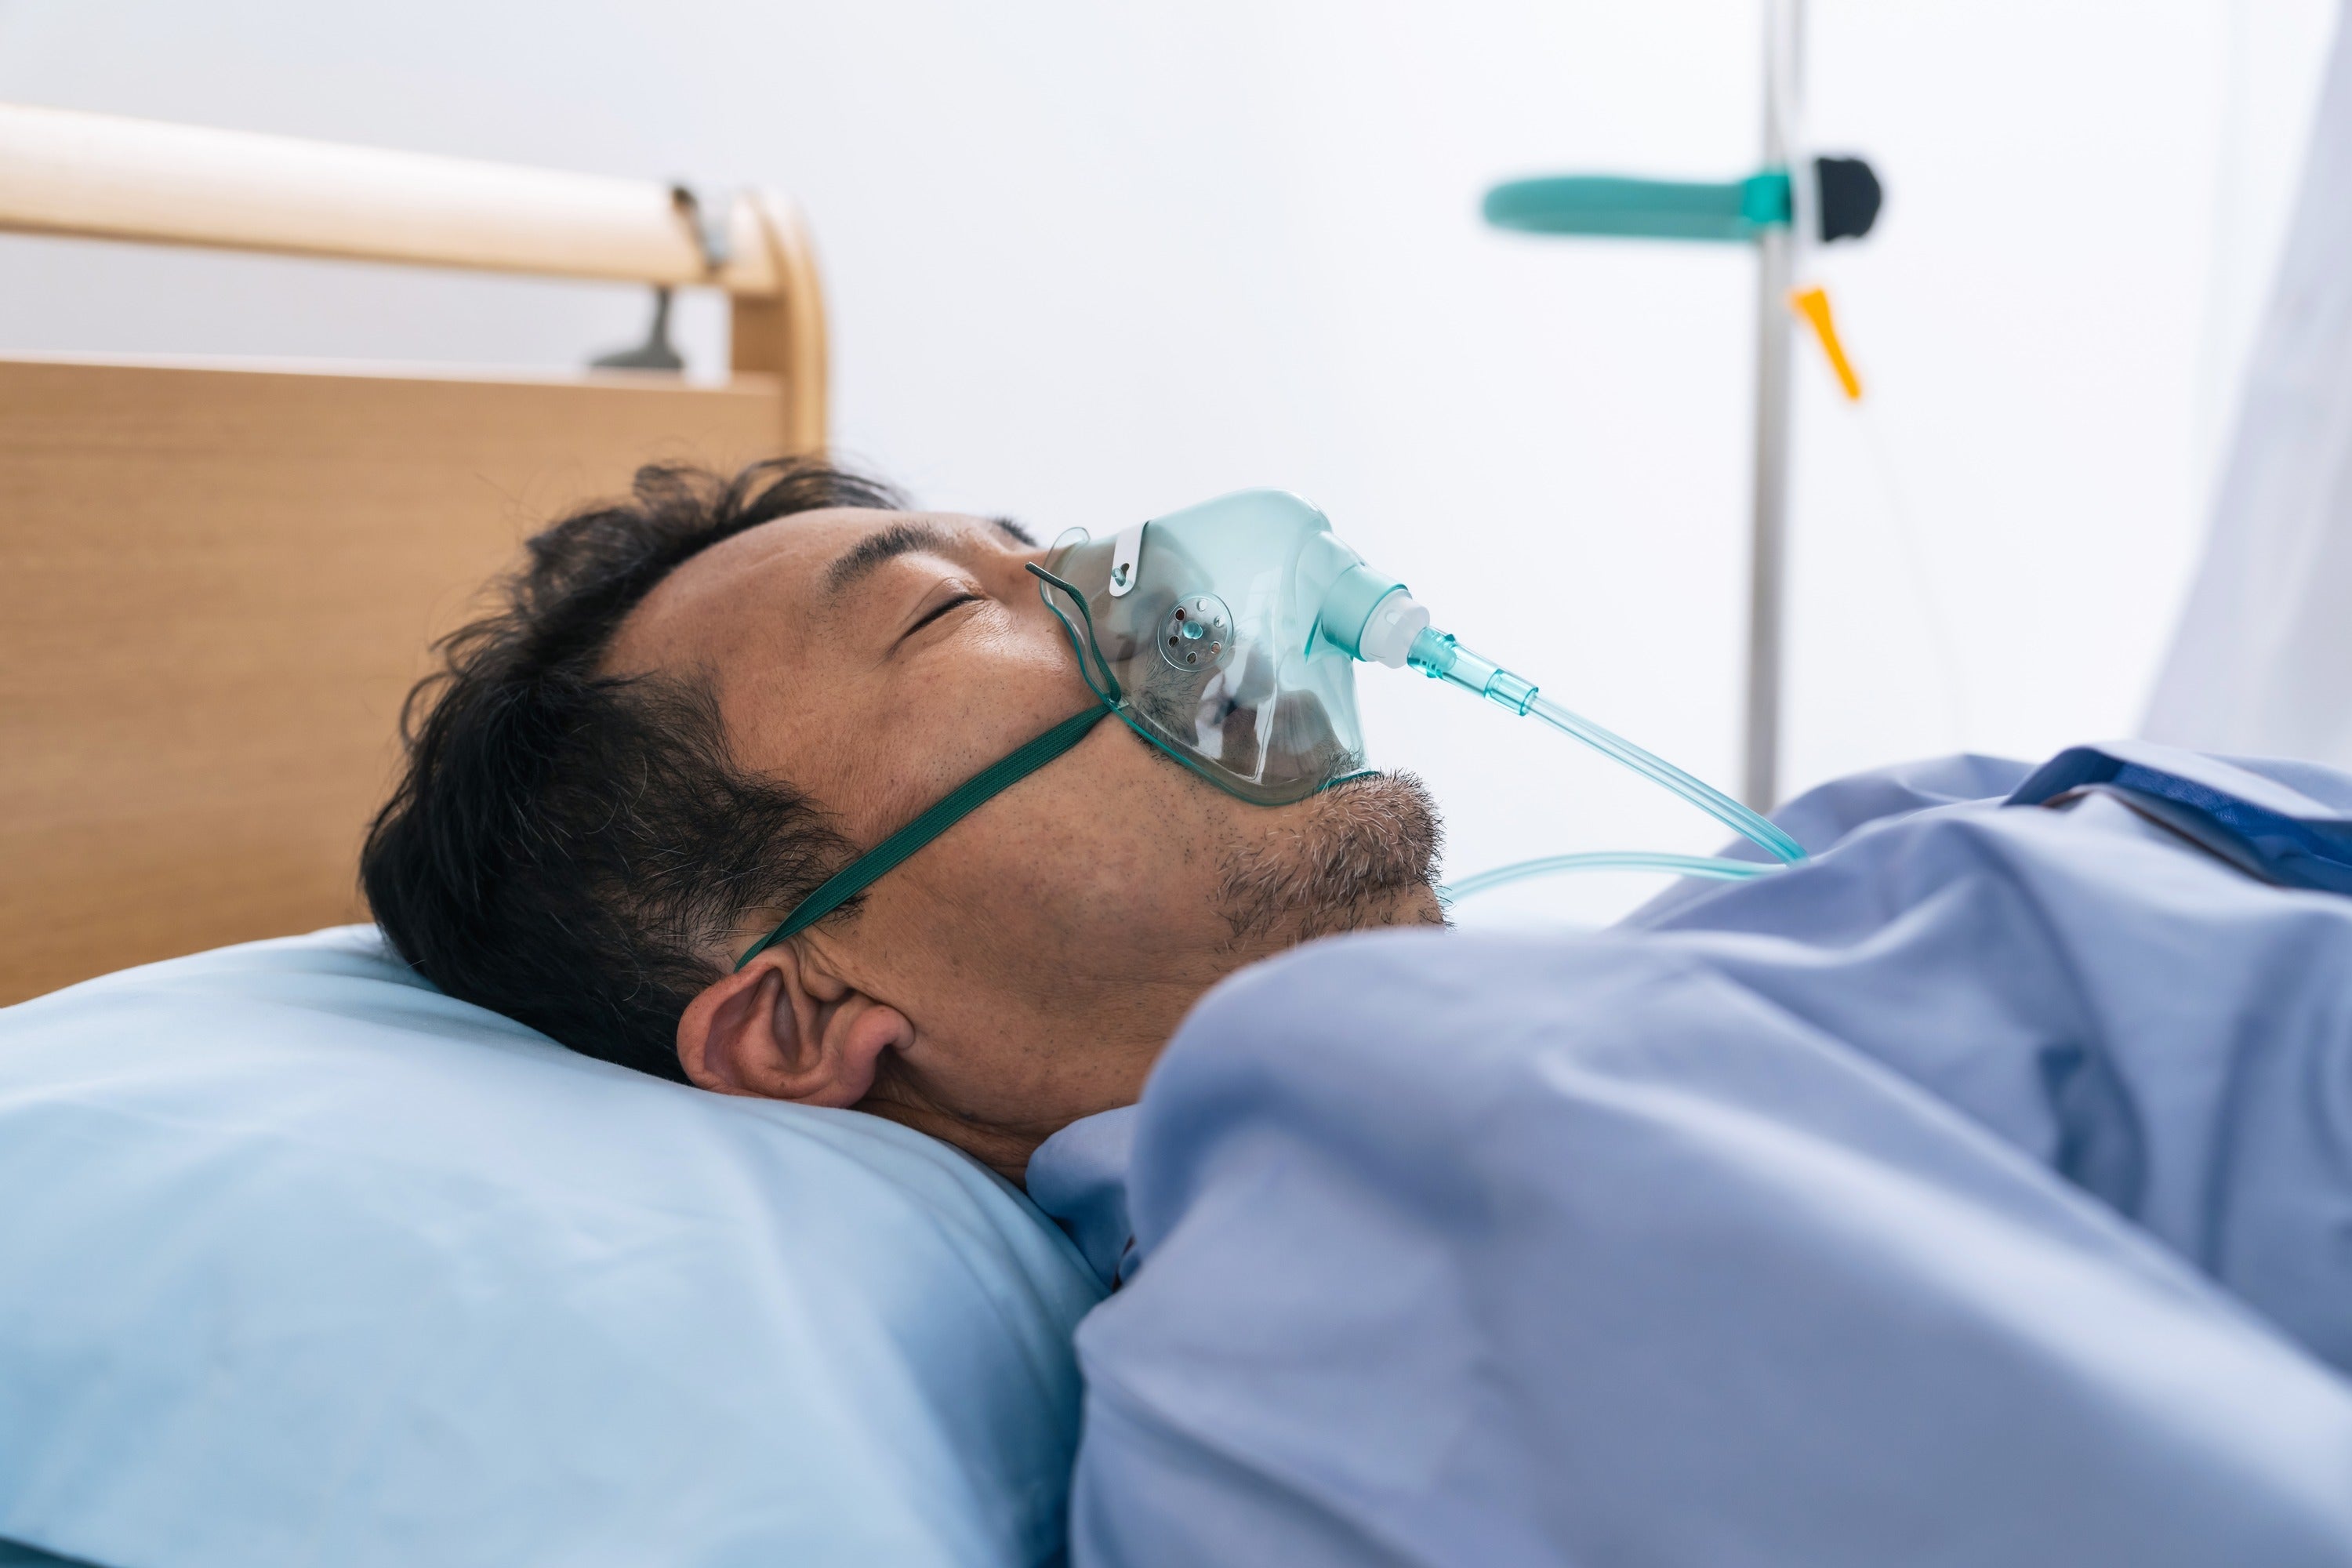 3 Statistics and Facts About Not Waking Up After Anesthesia